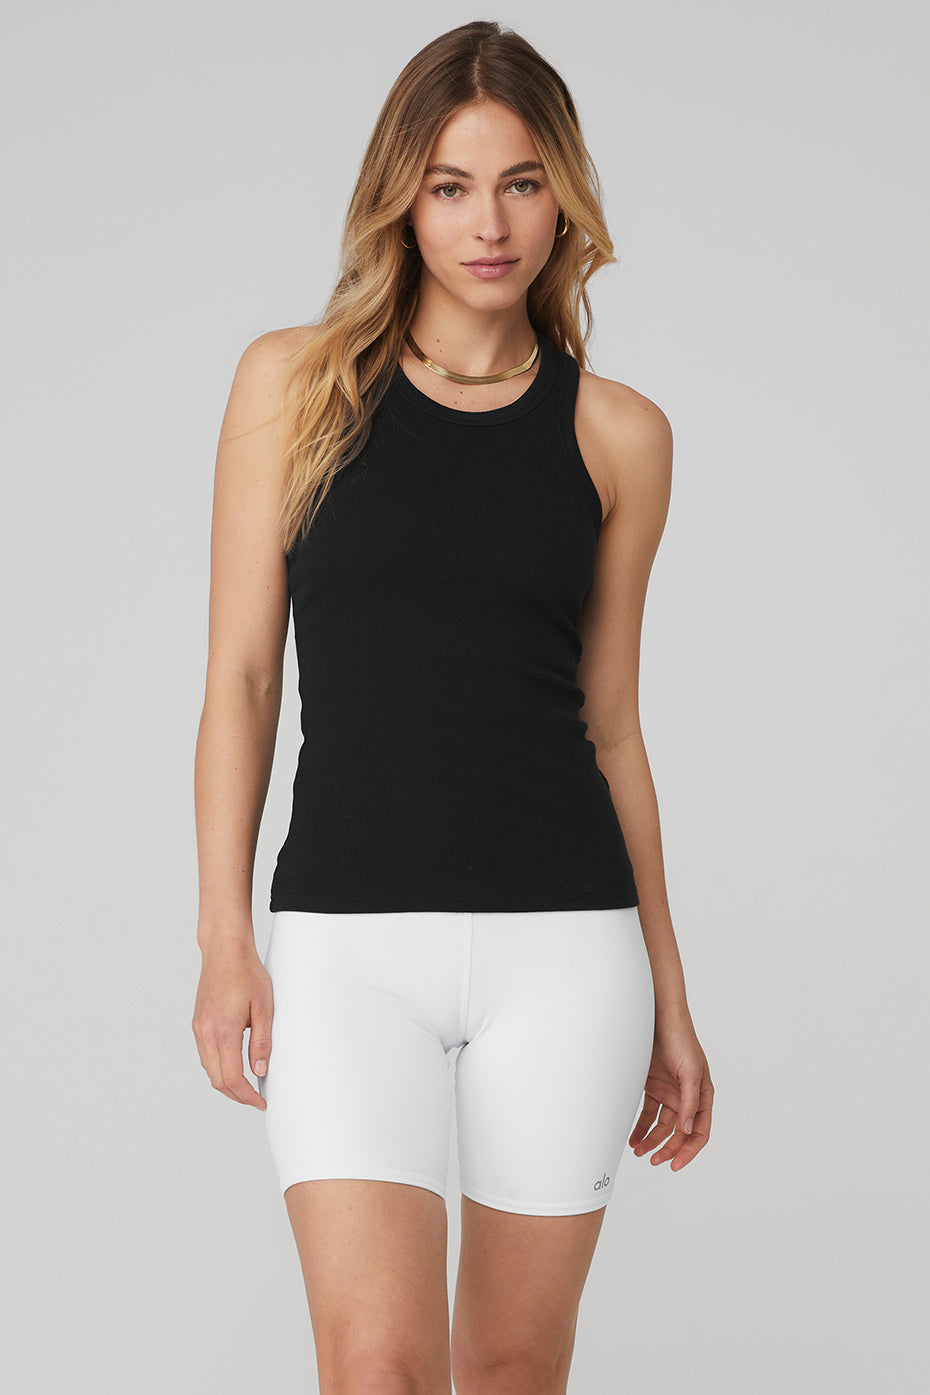 Women's Ribbed High-Neck Tank, Women's Clearance